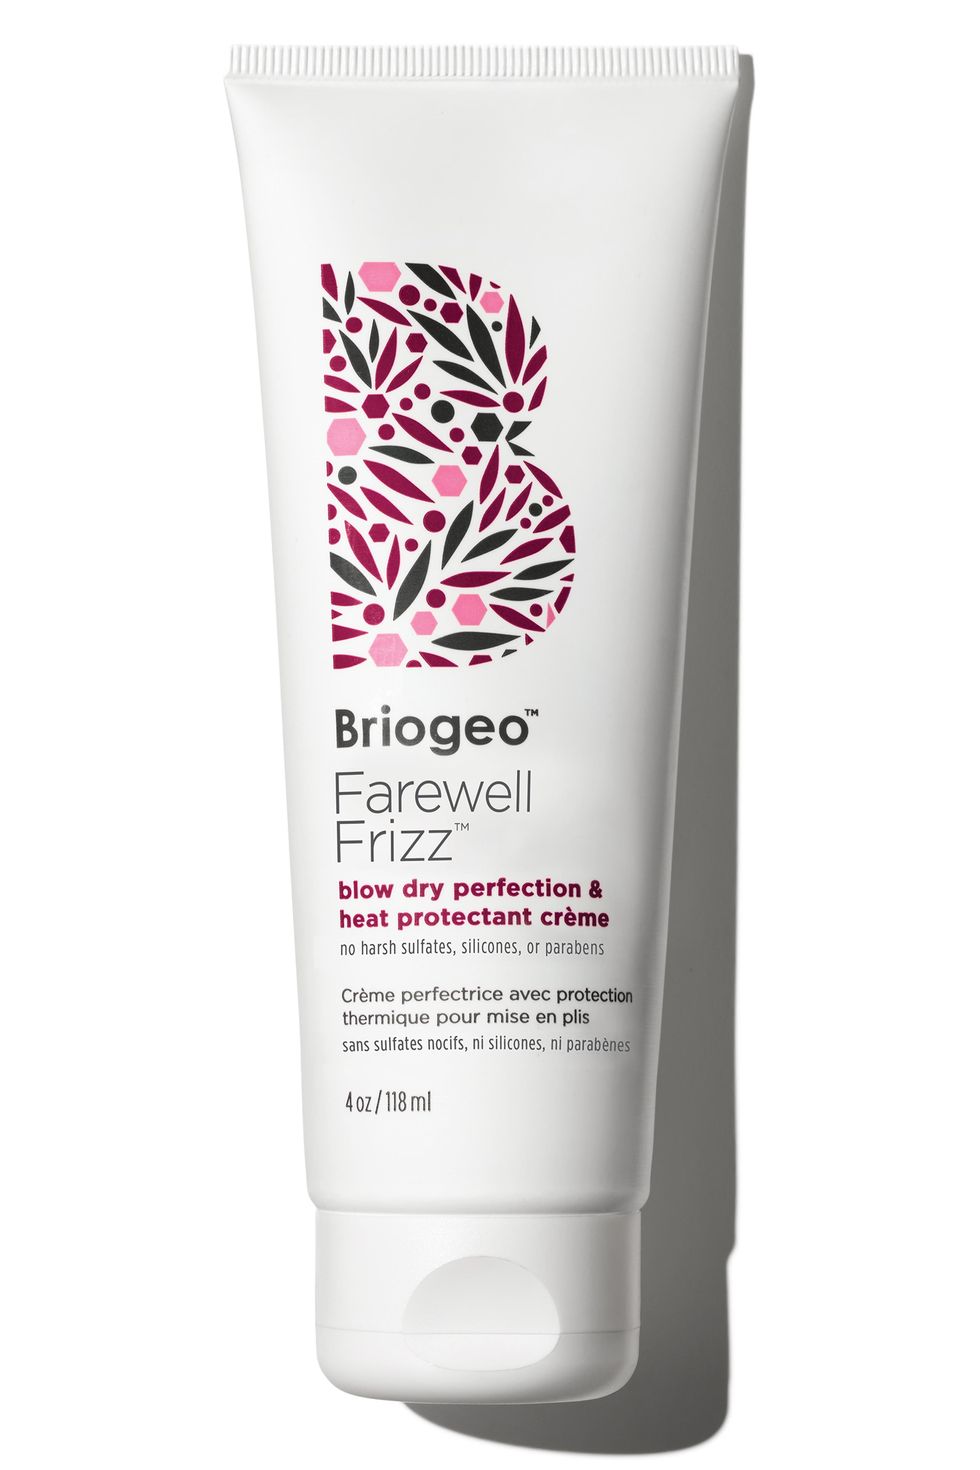 Farewell Frizz Blow Dry Perfection and Heat Protectant Crème